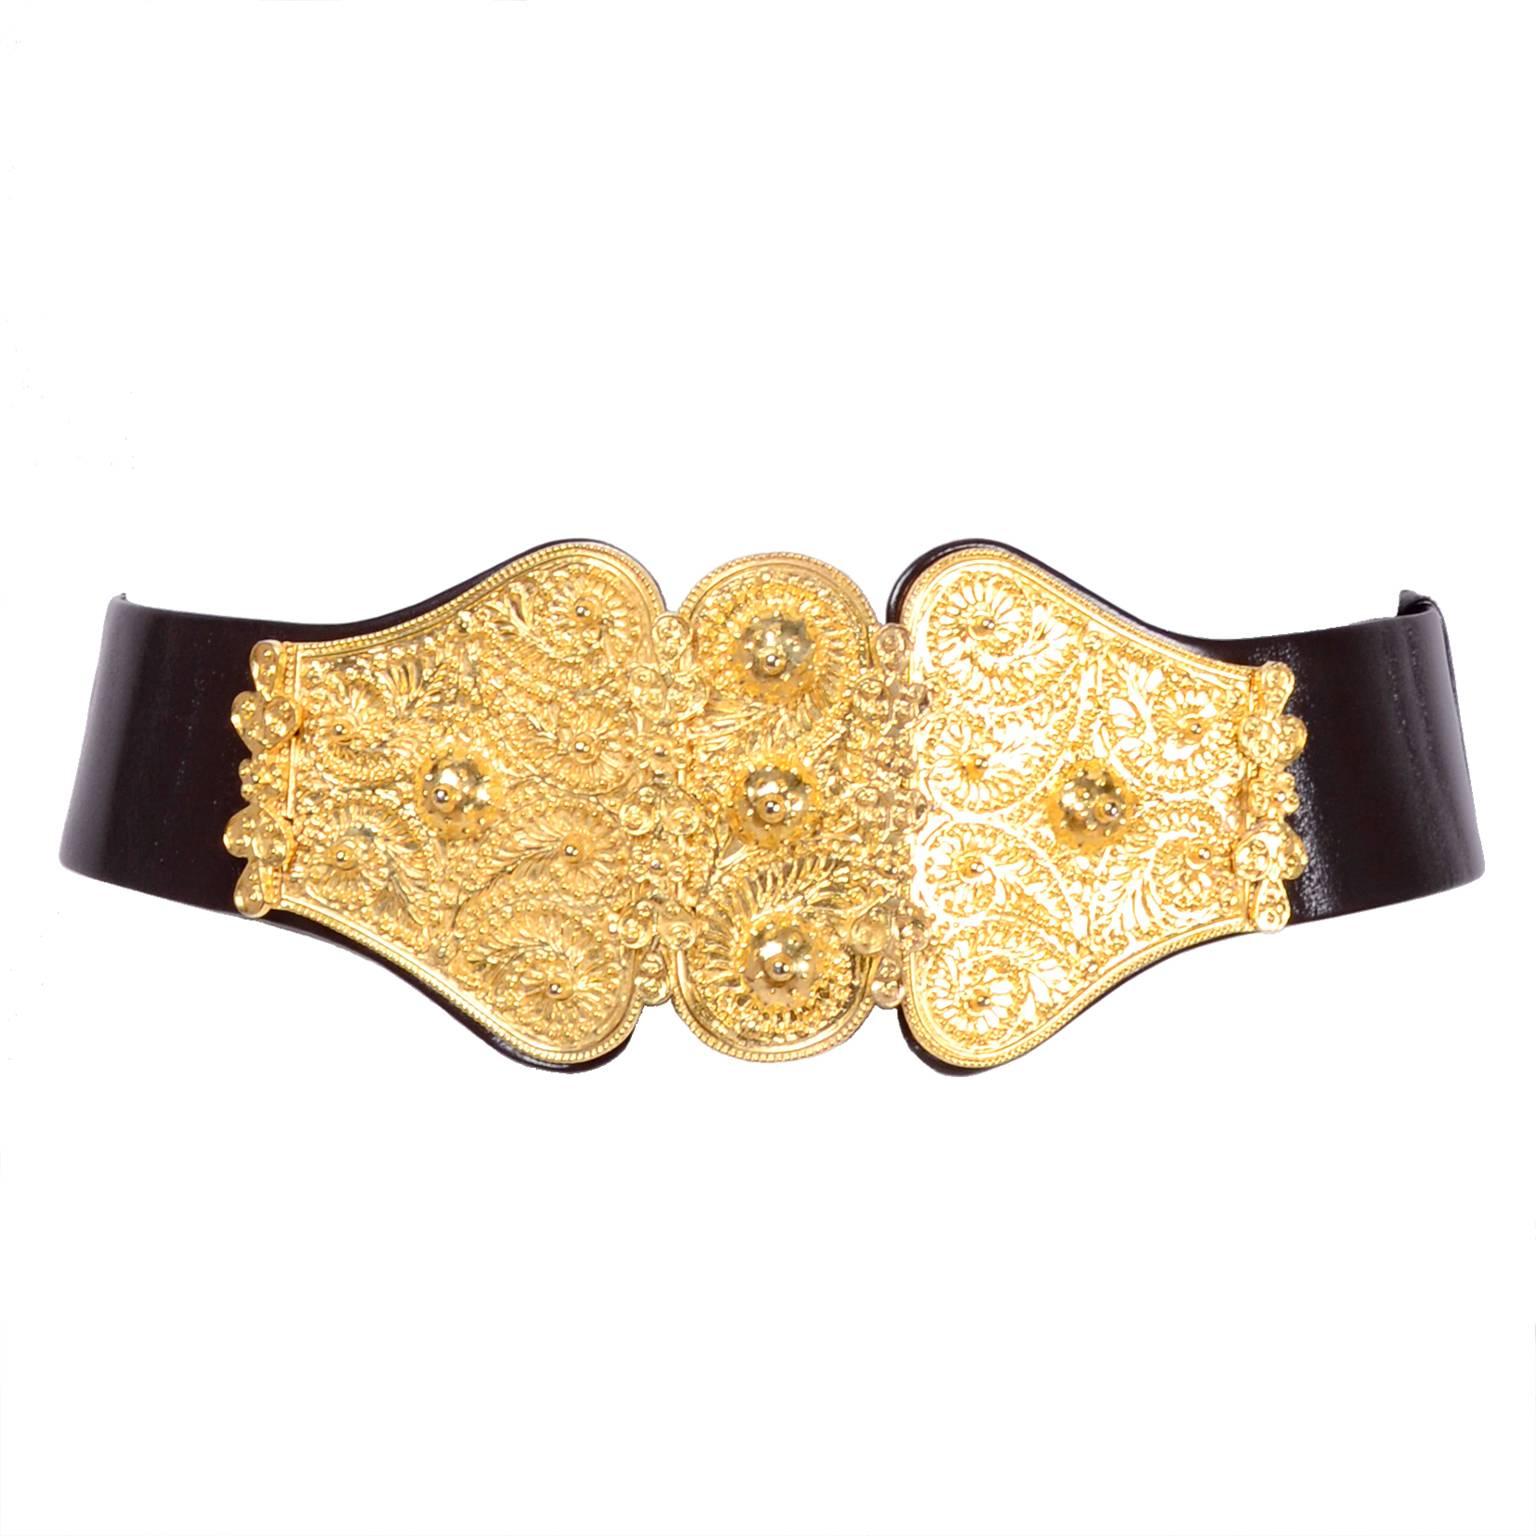 1980s Judith Leiber Black Leather Belt With Gold Buckle & Adjustable Size